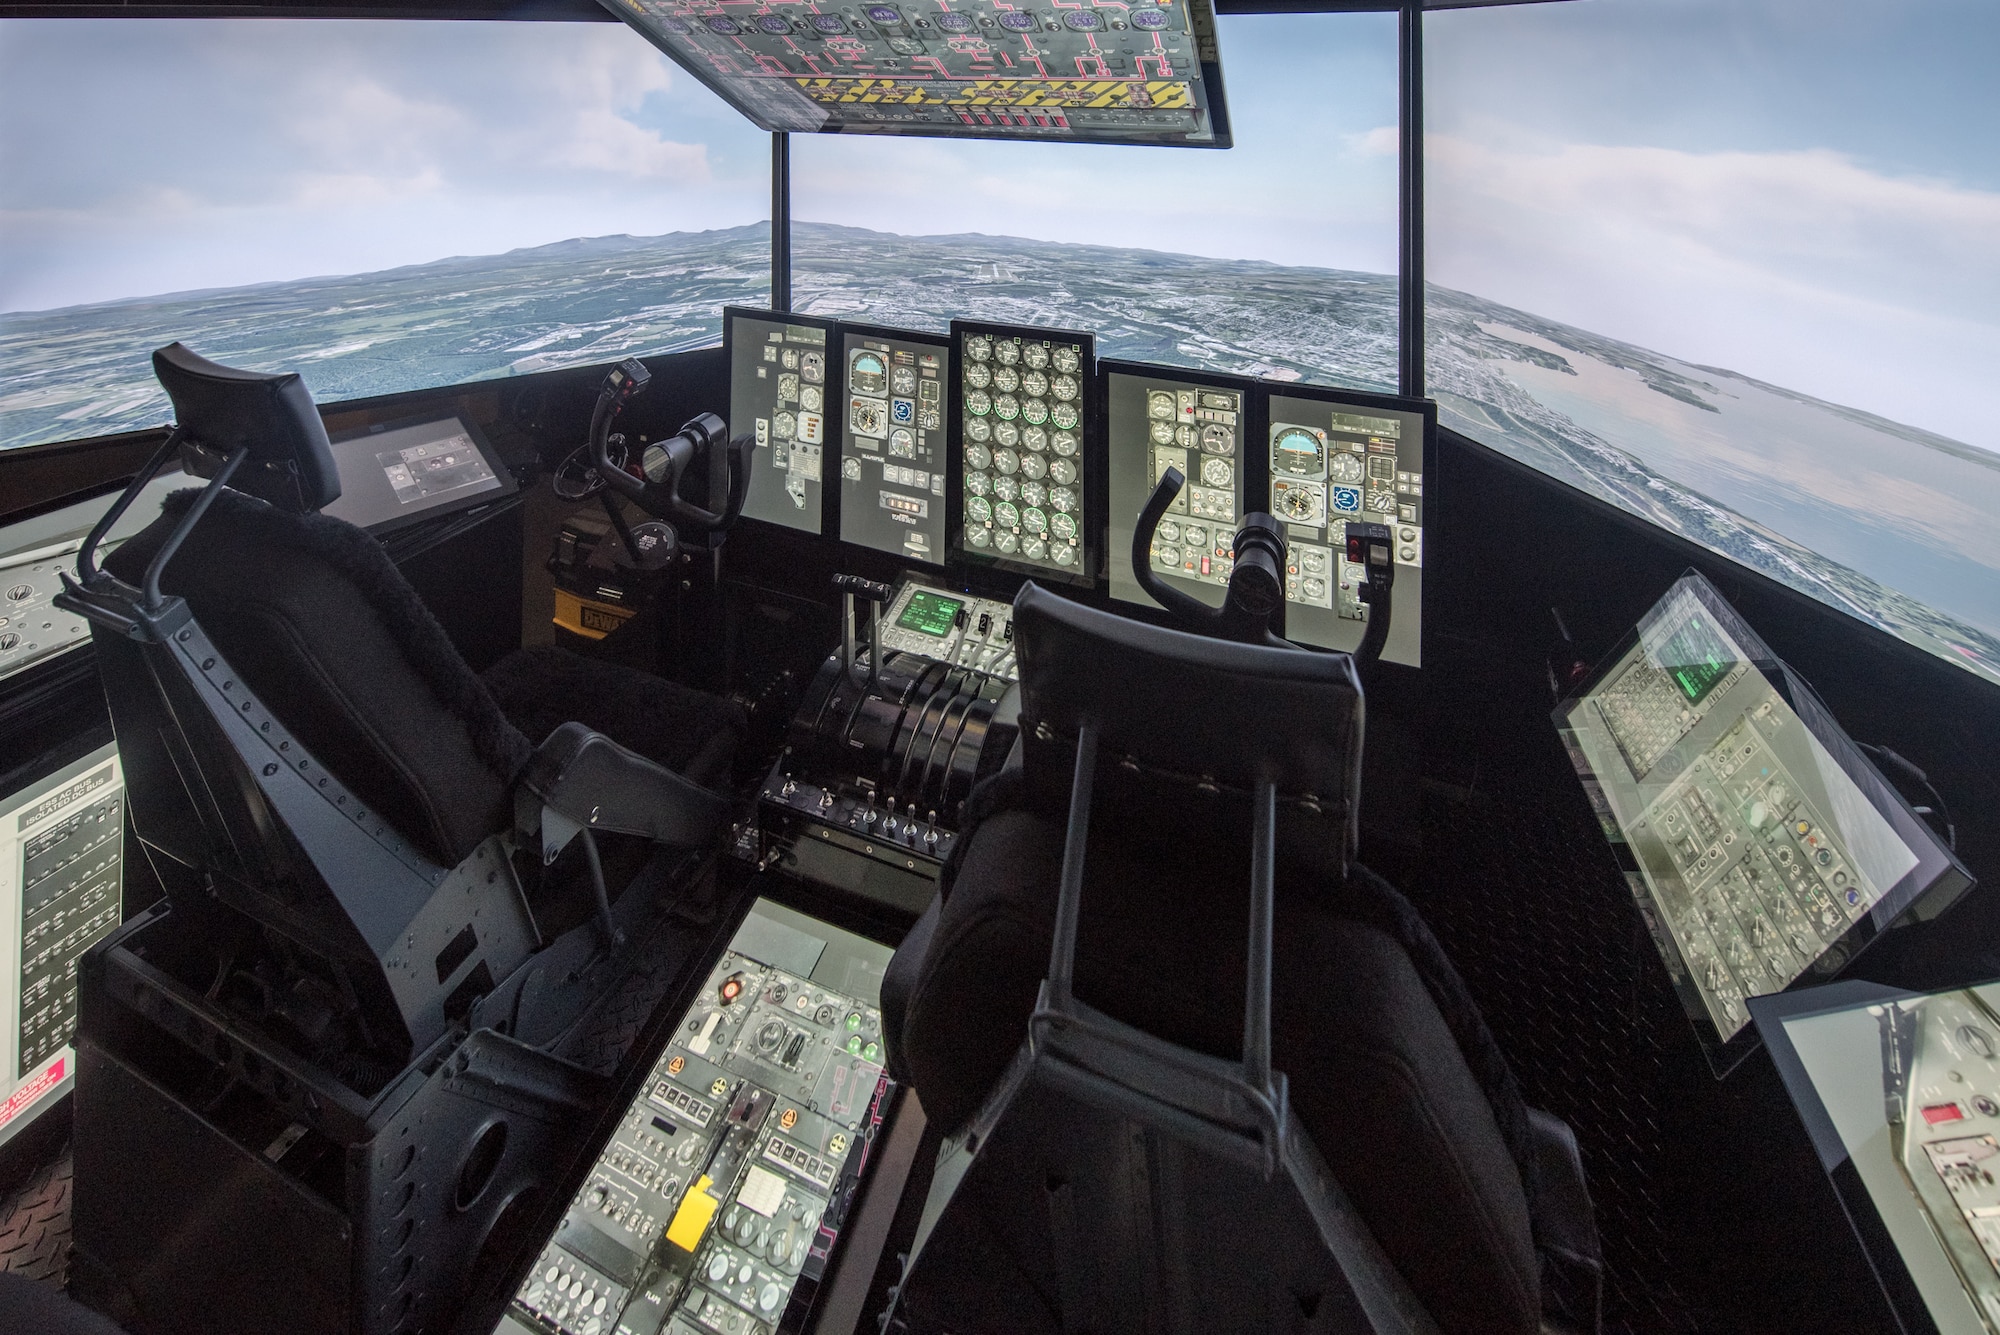 A C-130 Hercules aircraft simulator has been installed at the Kentucky Air National Guard base in Louisville, Ky. Known as the Multi-Mission Crew Trainer, the system helps prepare Airmen for handling in-flight emergencies. (U.S. Air National Guard photo by Phil Speck)